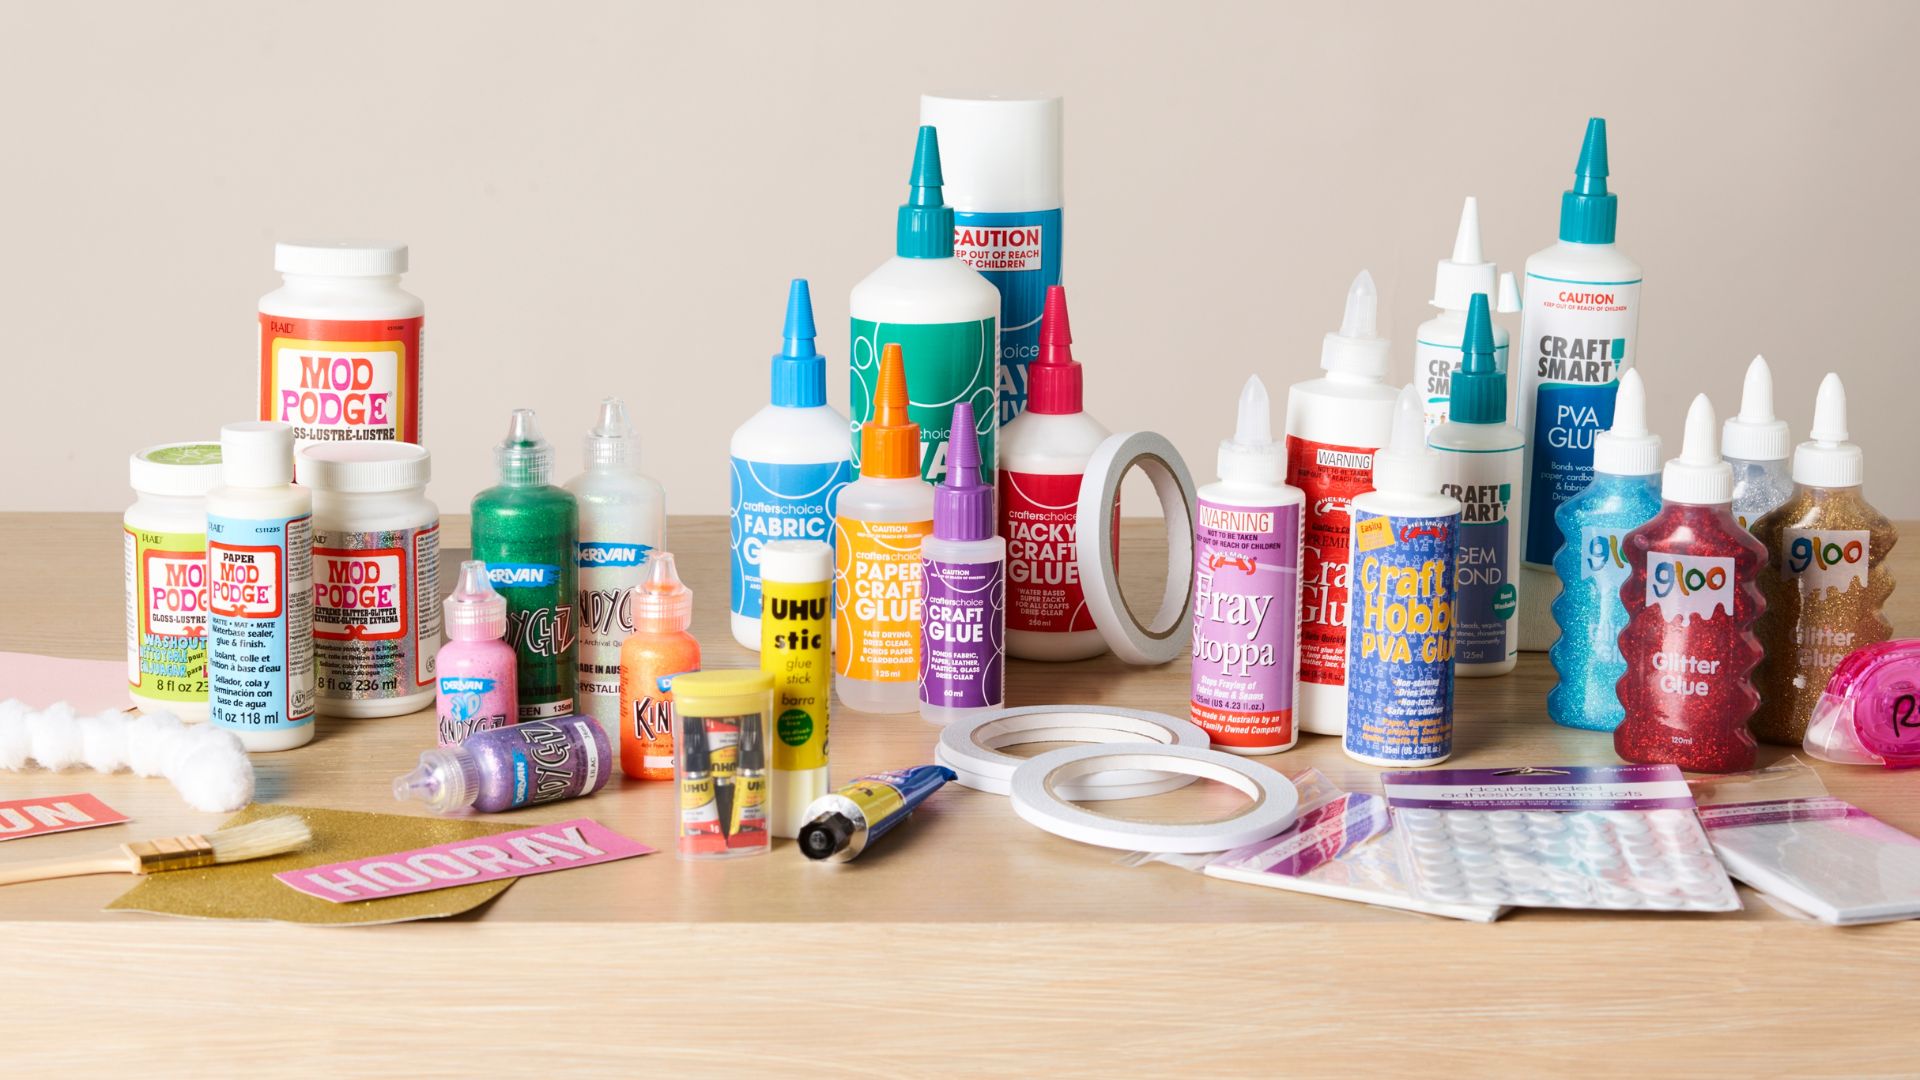 Glues & Adhesives from Mod Podge, UHU, Crafters Choice, Gloo, Craft Smart and more!